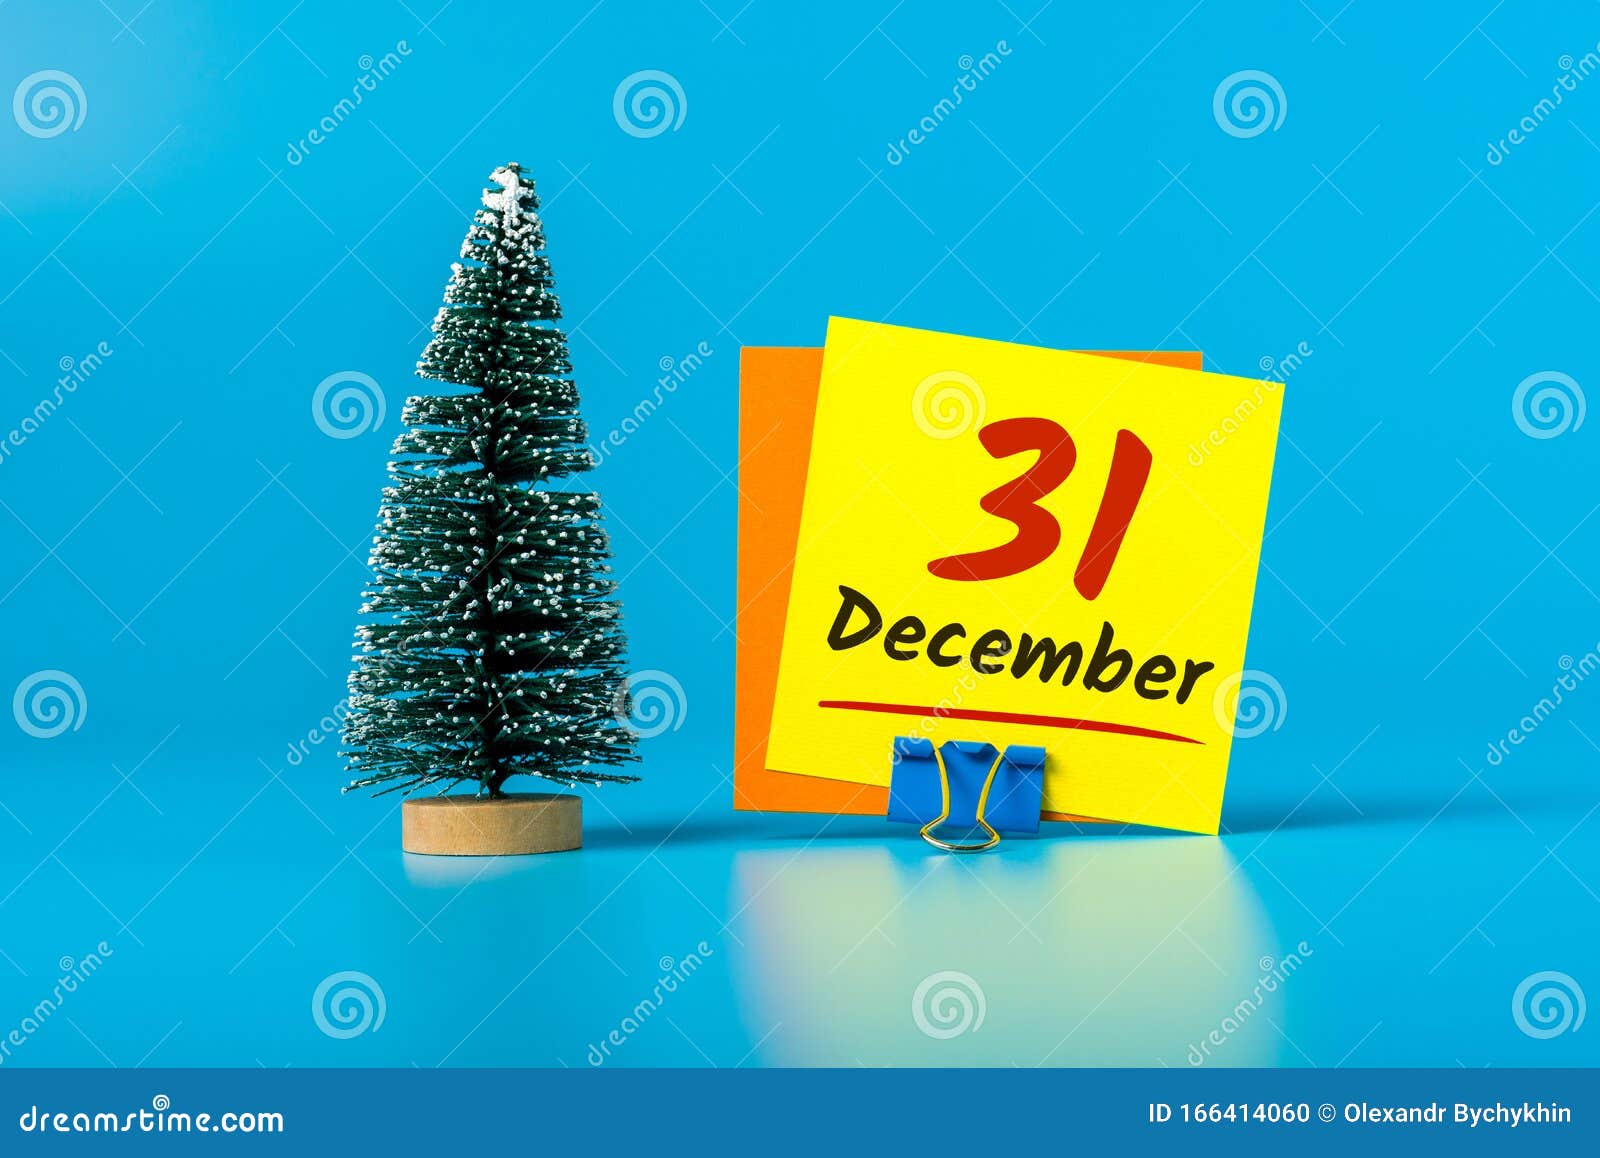 December 31st. Image 31 Day Of December Month, Calendar With Christmas Tree On Blue Background ...